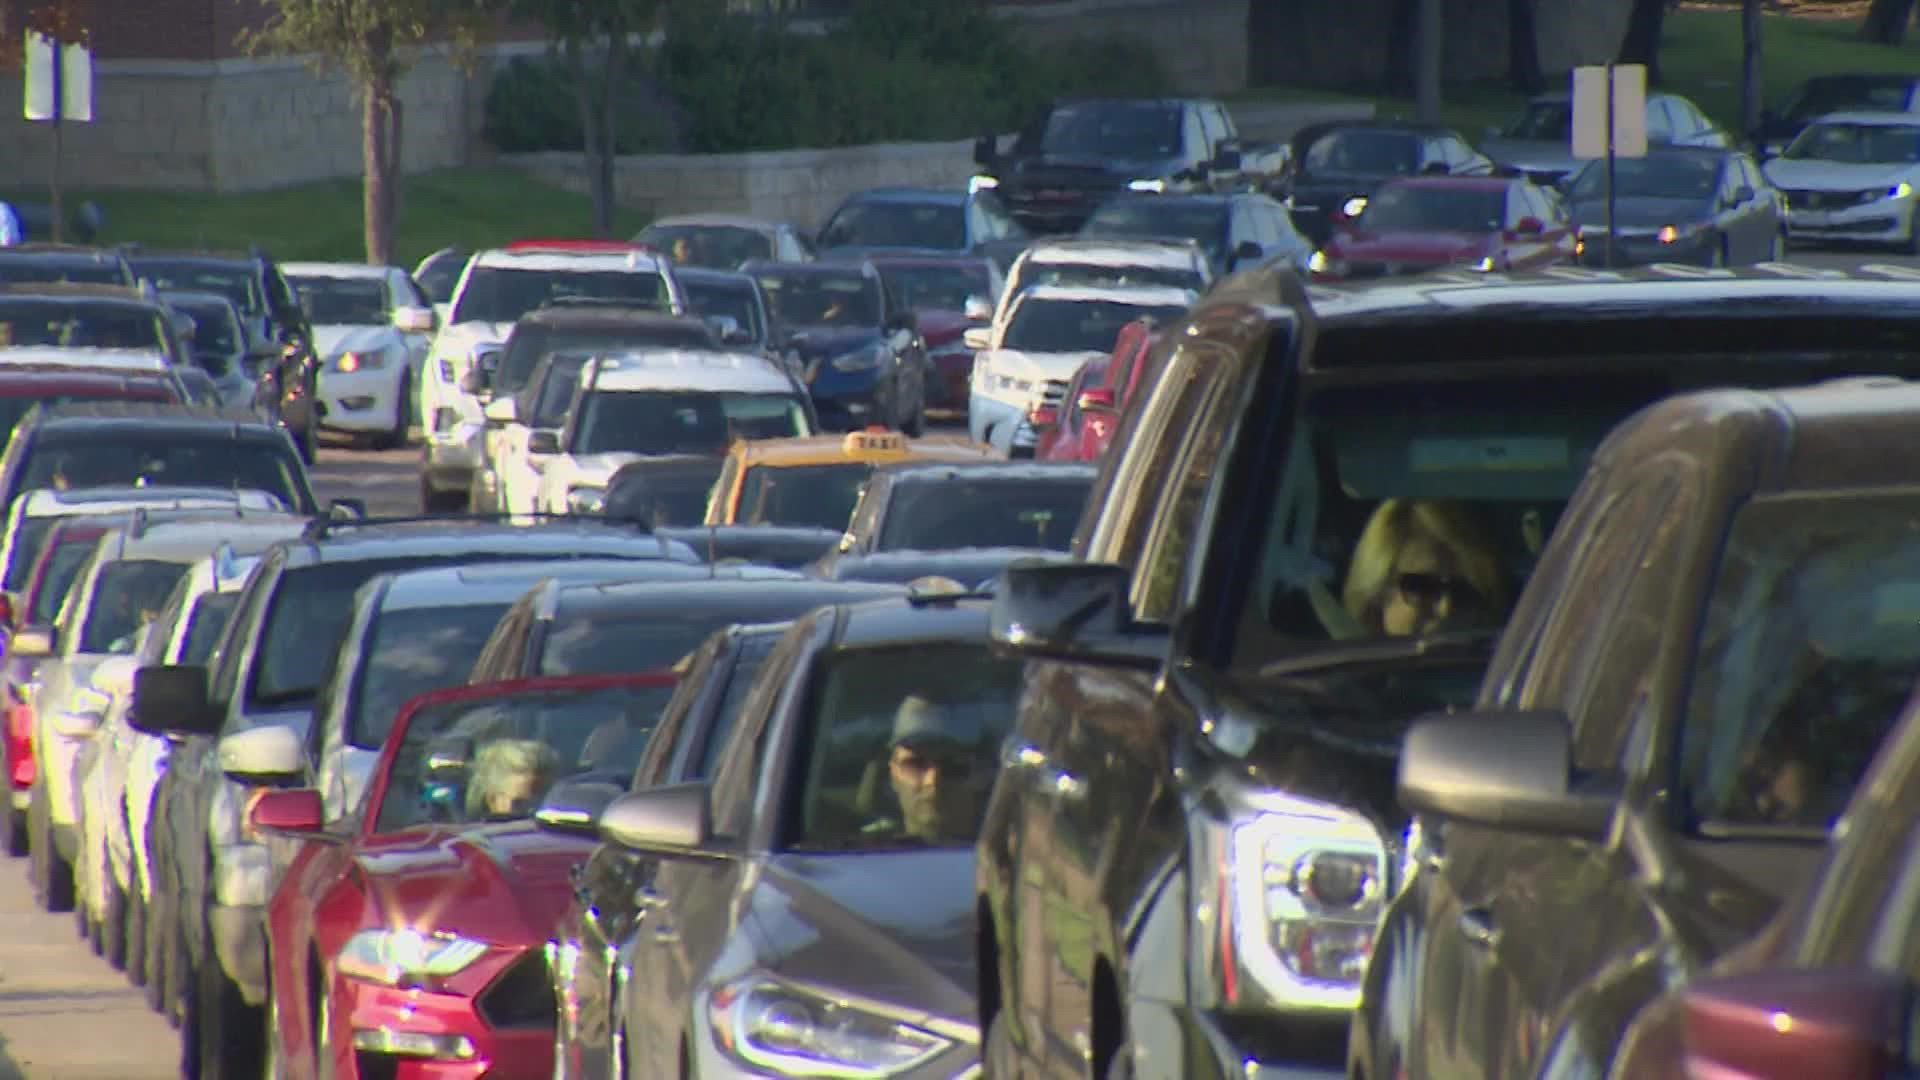 With games and concerts going on all over Arlington Friday night, it left the roads flooded with traffic.